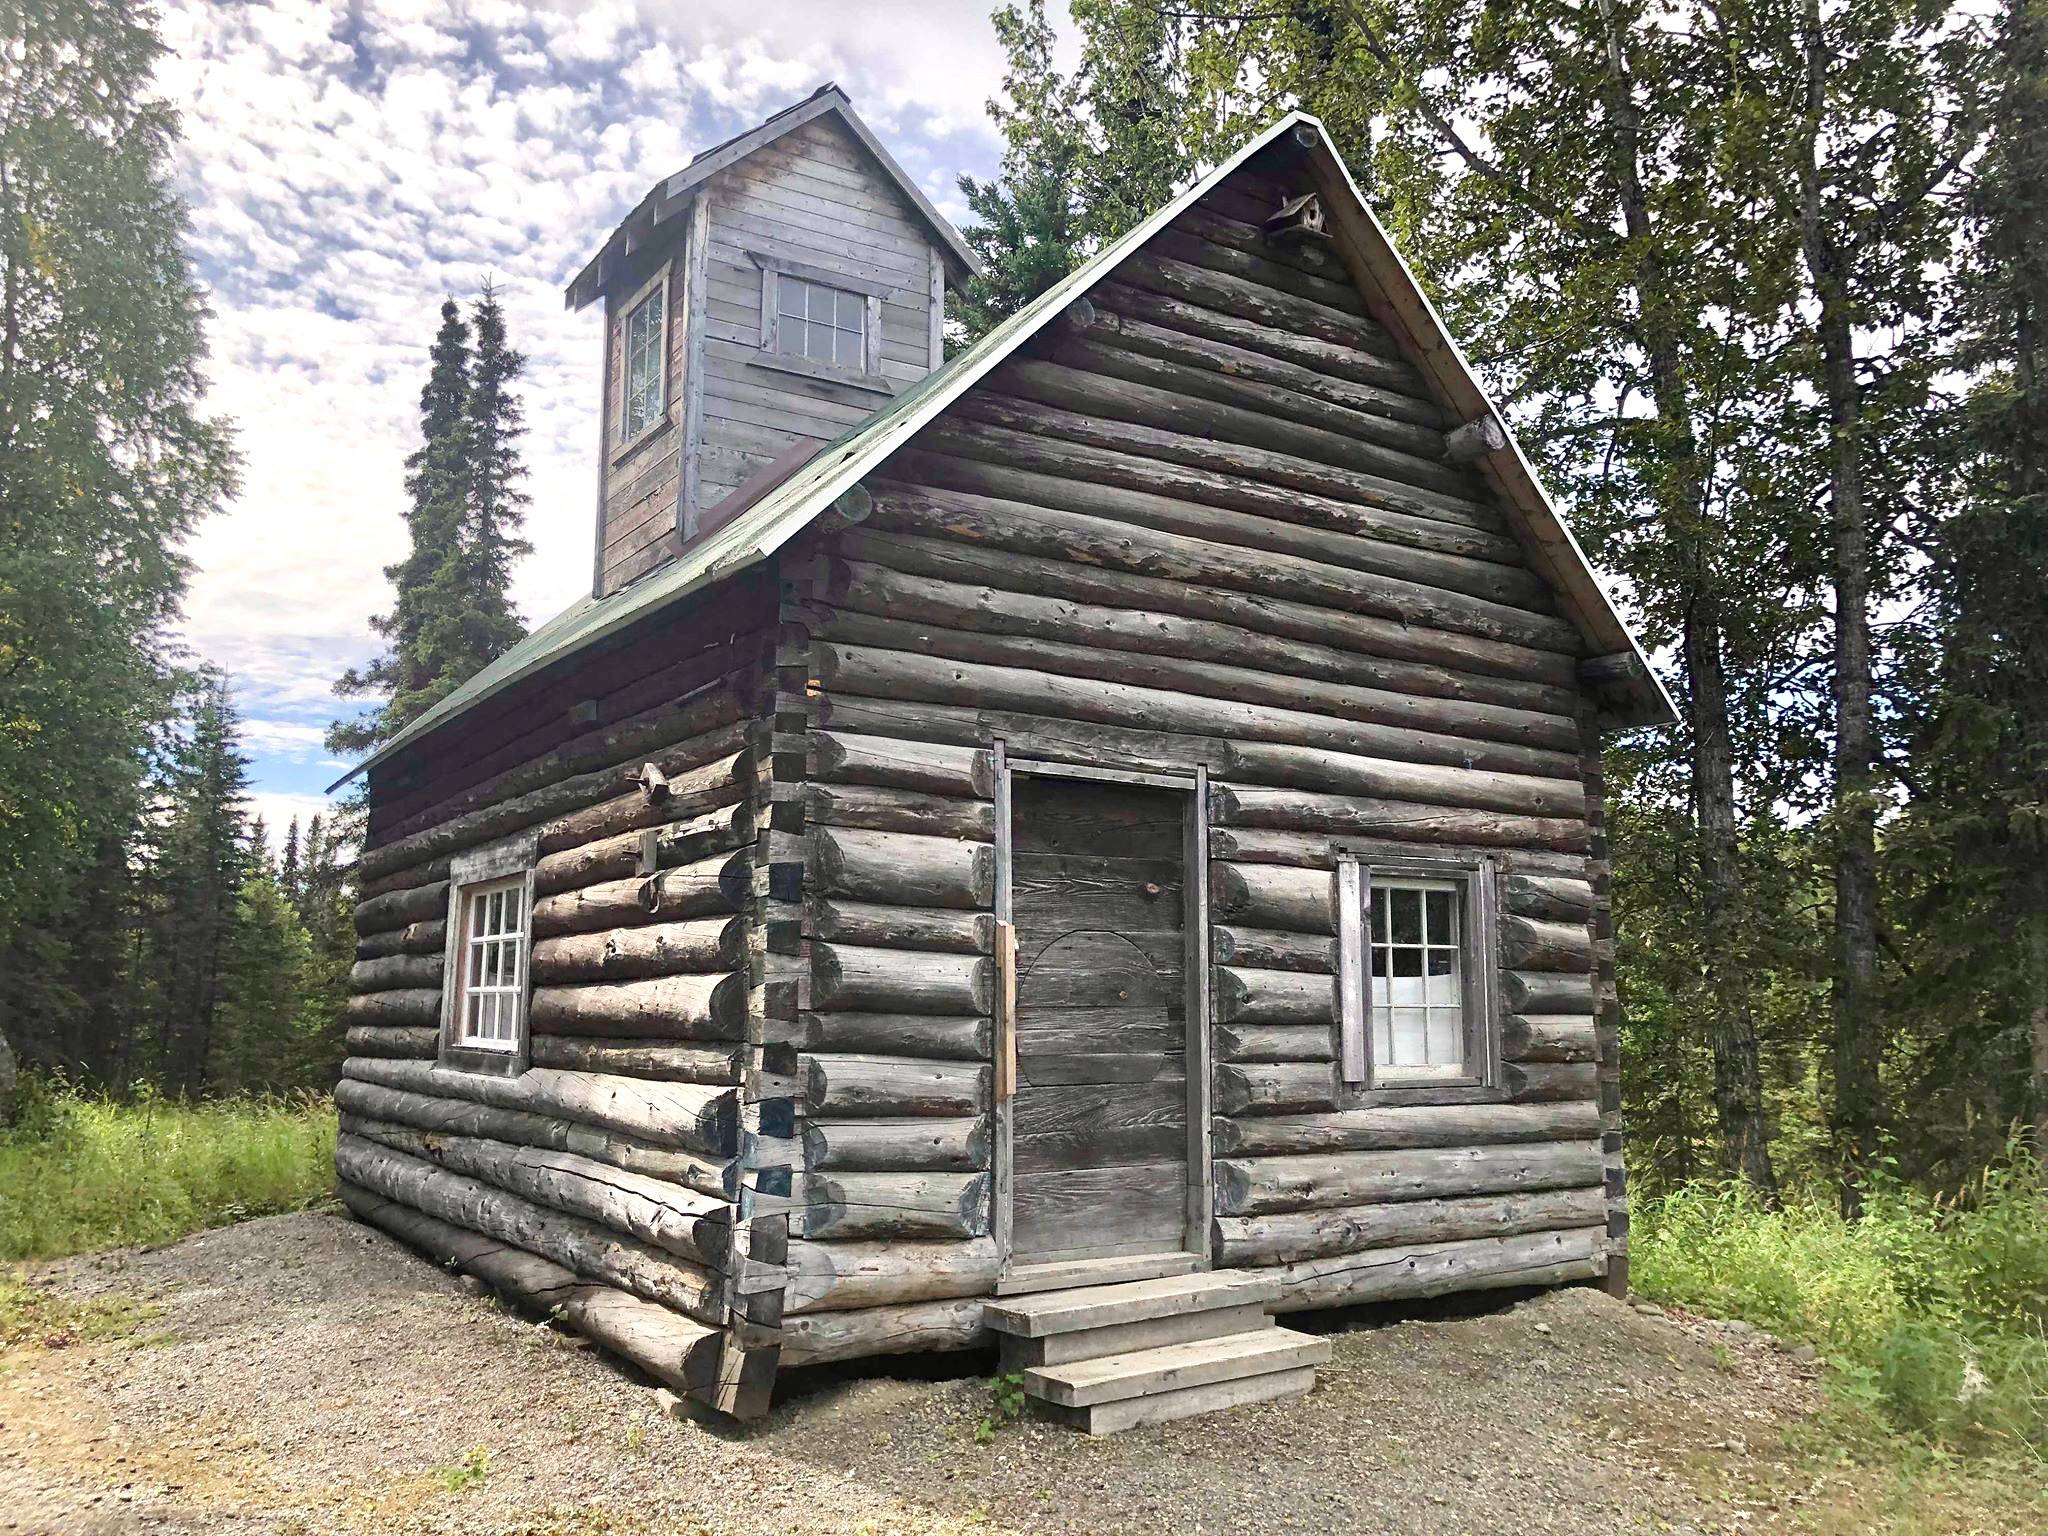 A building used for fox farming, a unique industry in Kasilof between 1920 and 1940, on Wednesday, Aug. 29, 2018, in Kasilof, Alaska. (Photo by Victoria Petersen/Peninsula Clarion)